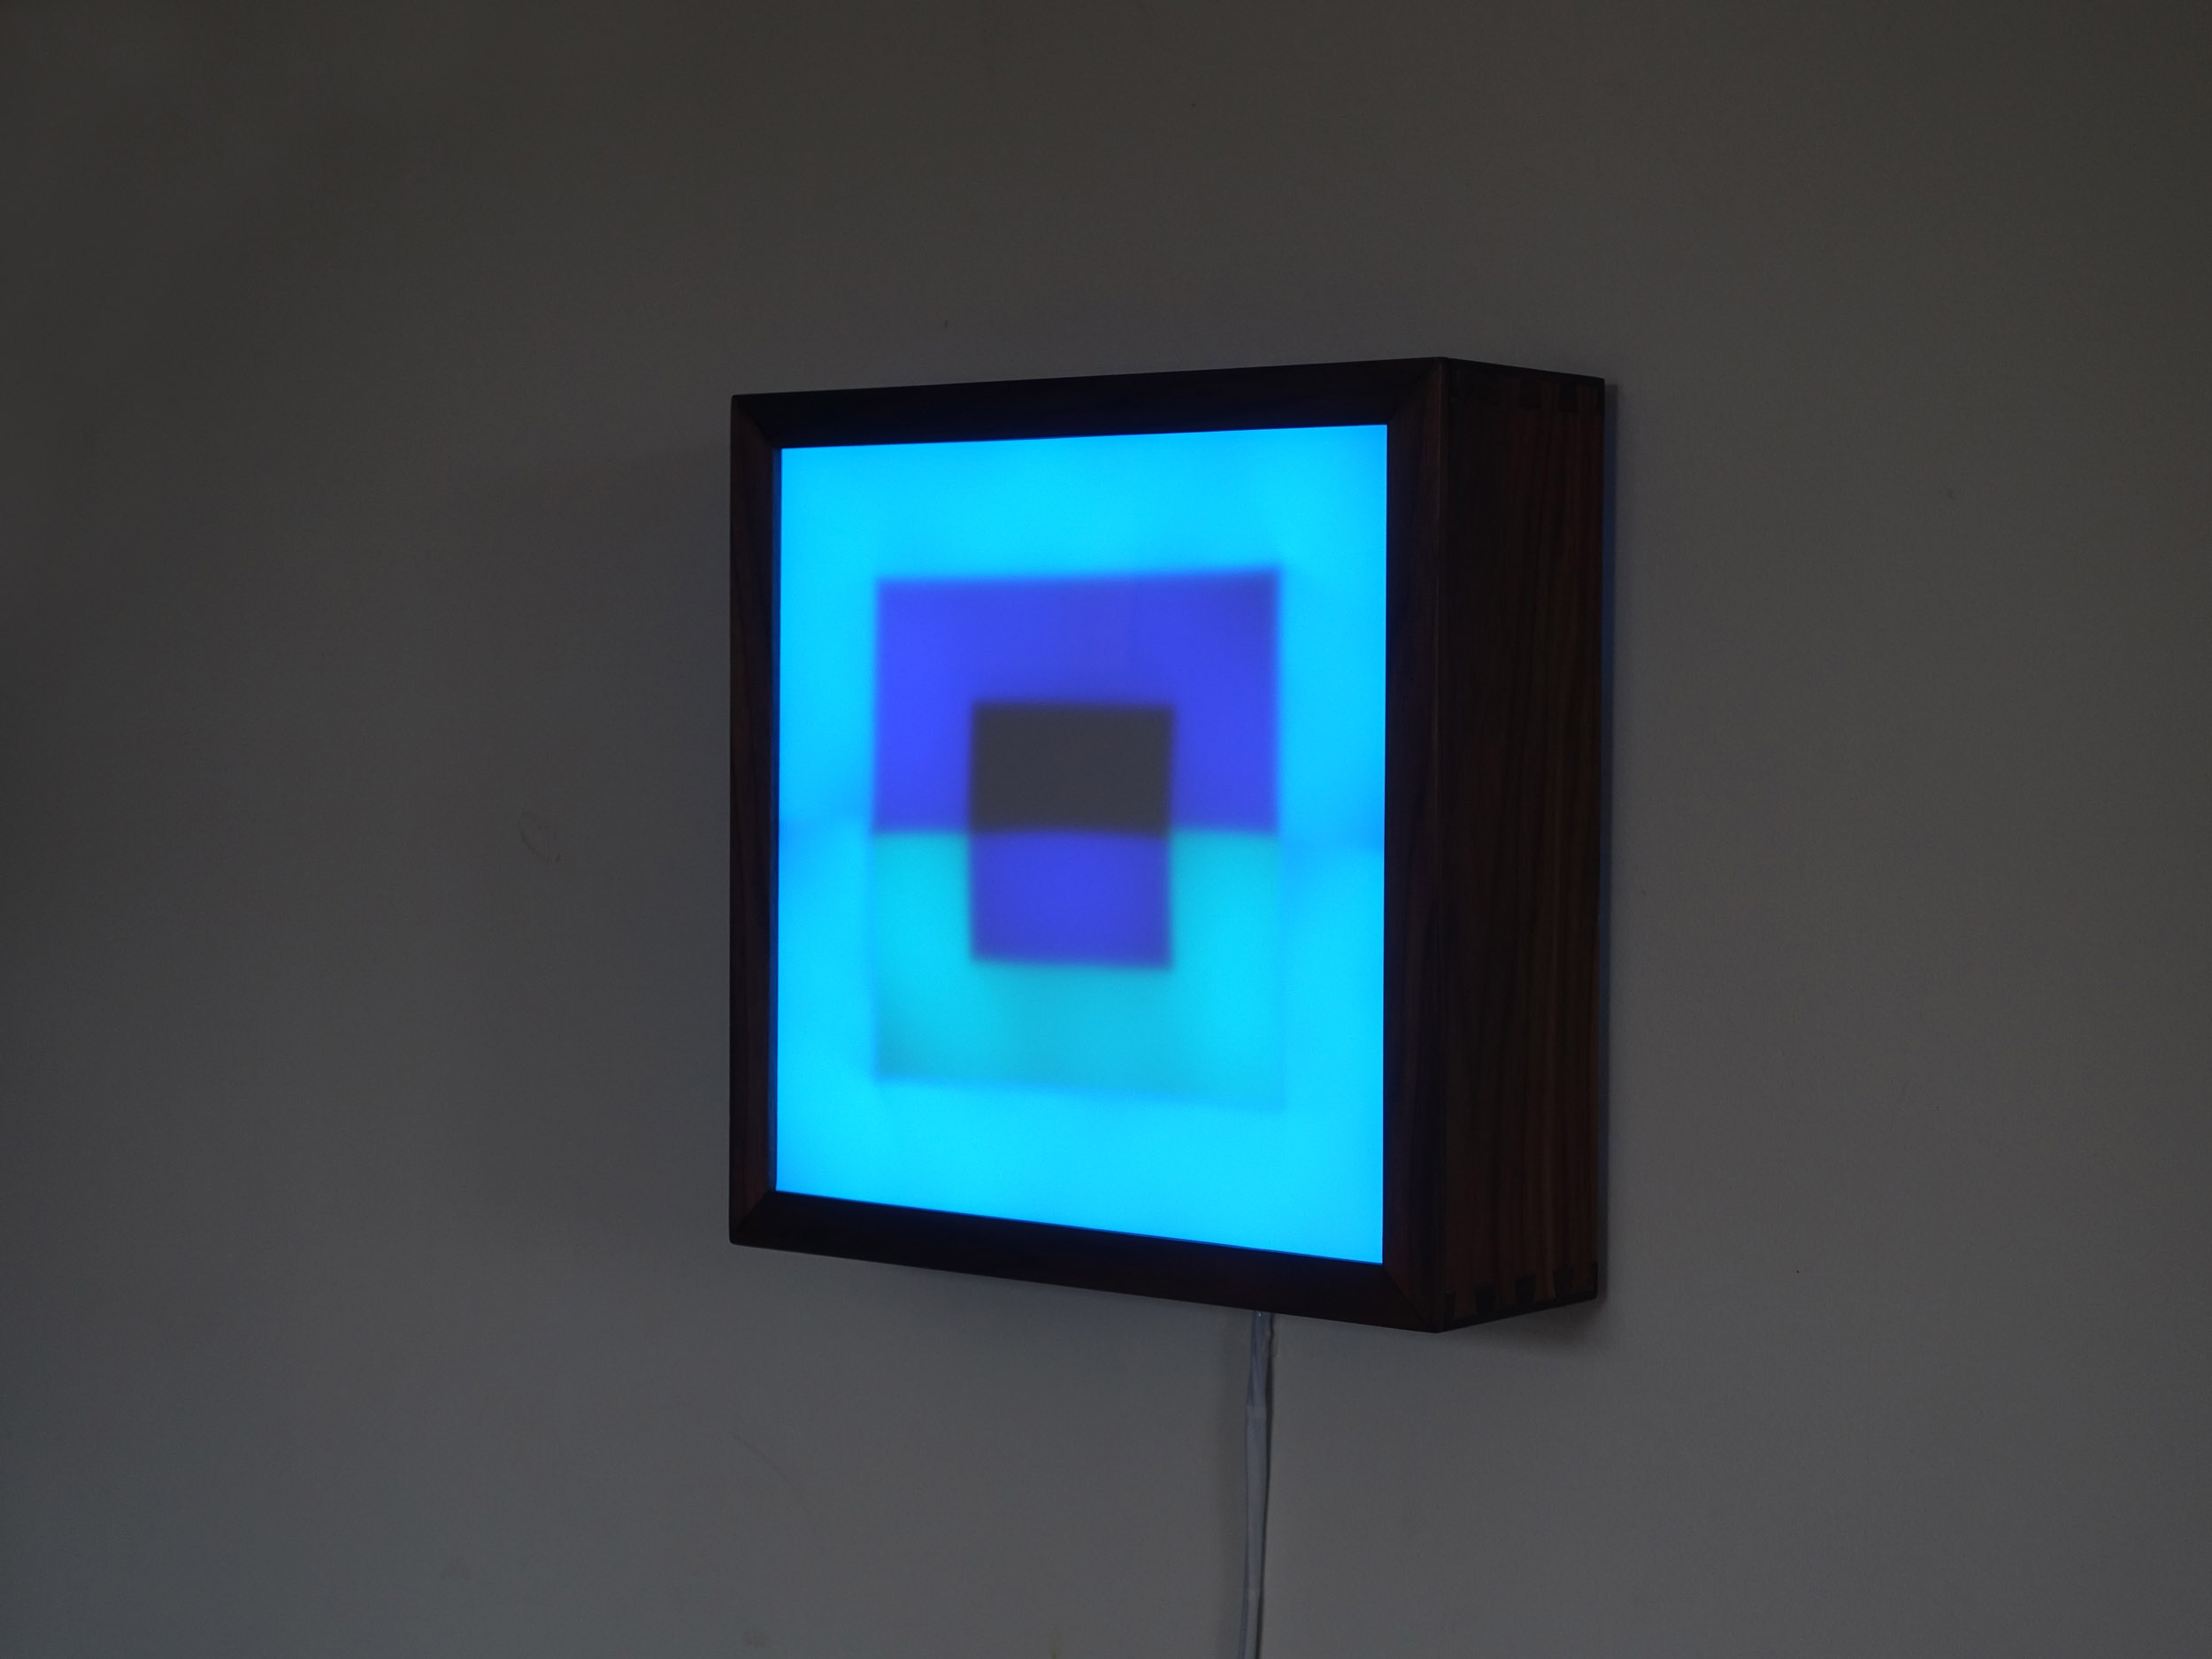 Copy of Square LED Lightbox prototype 2 of 5